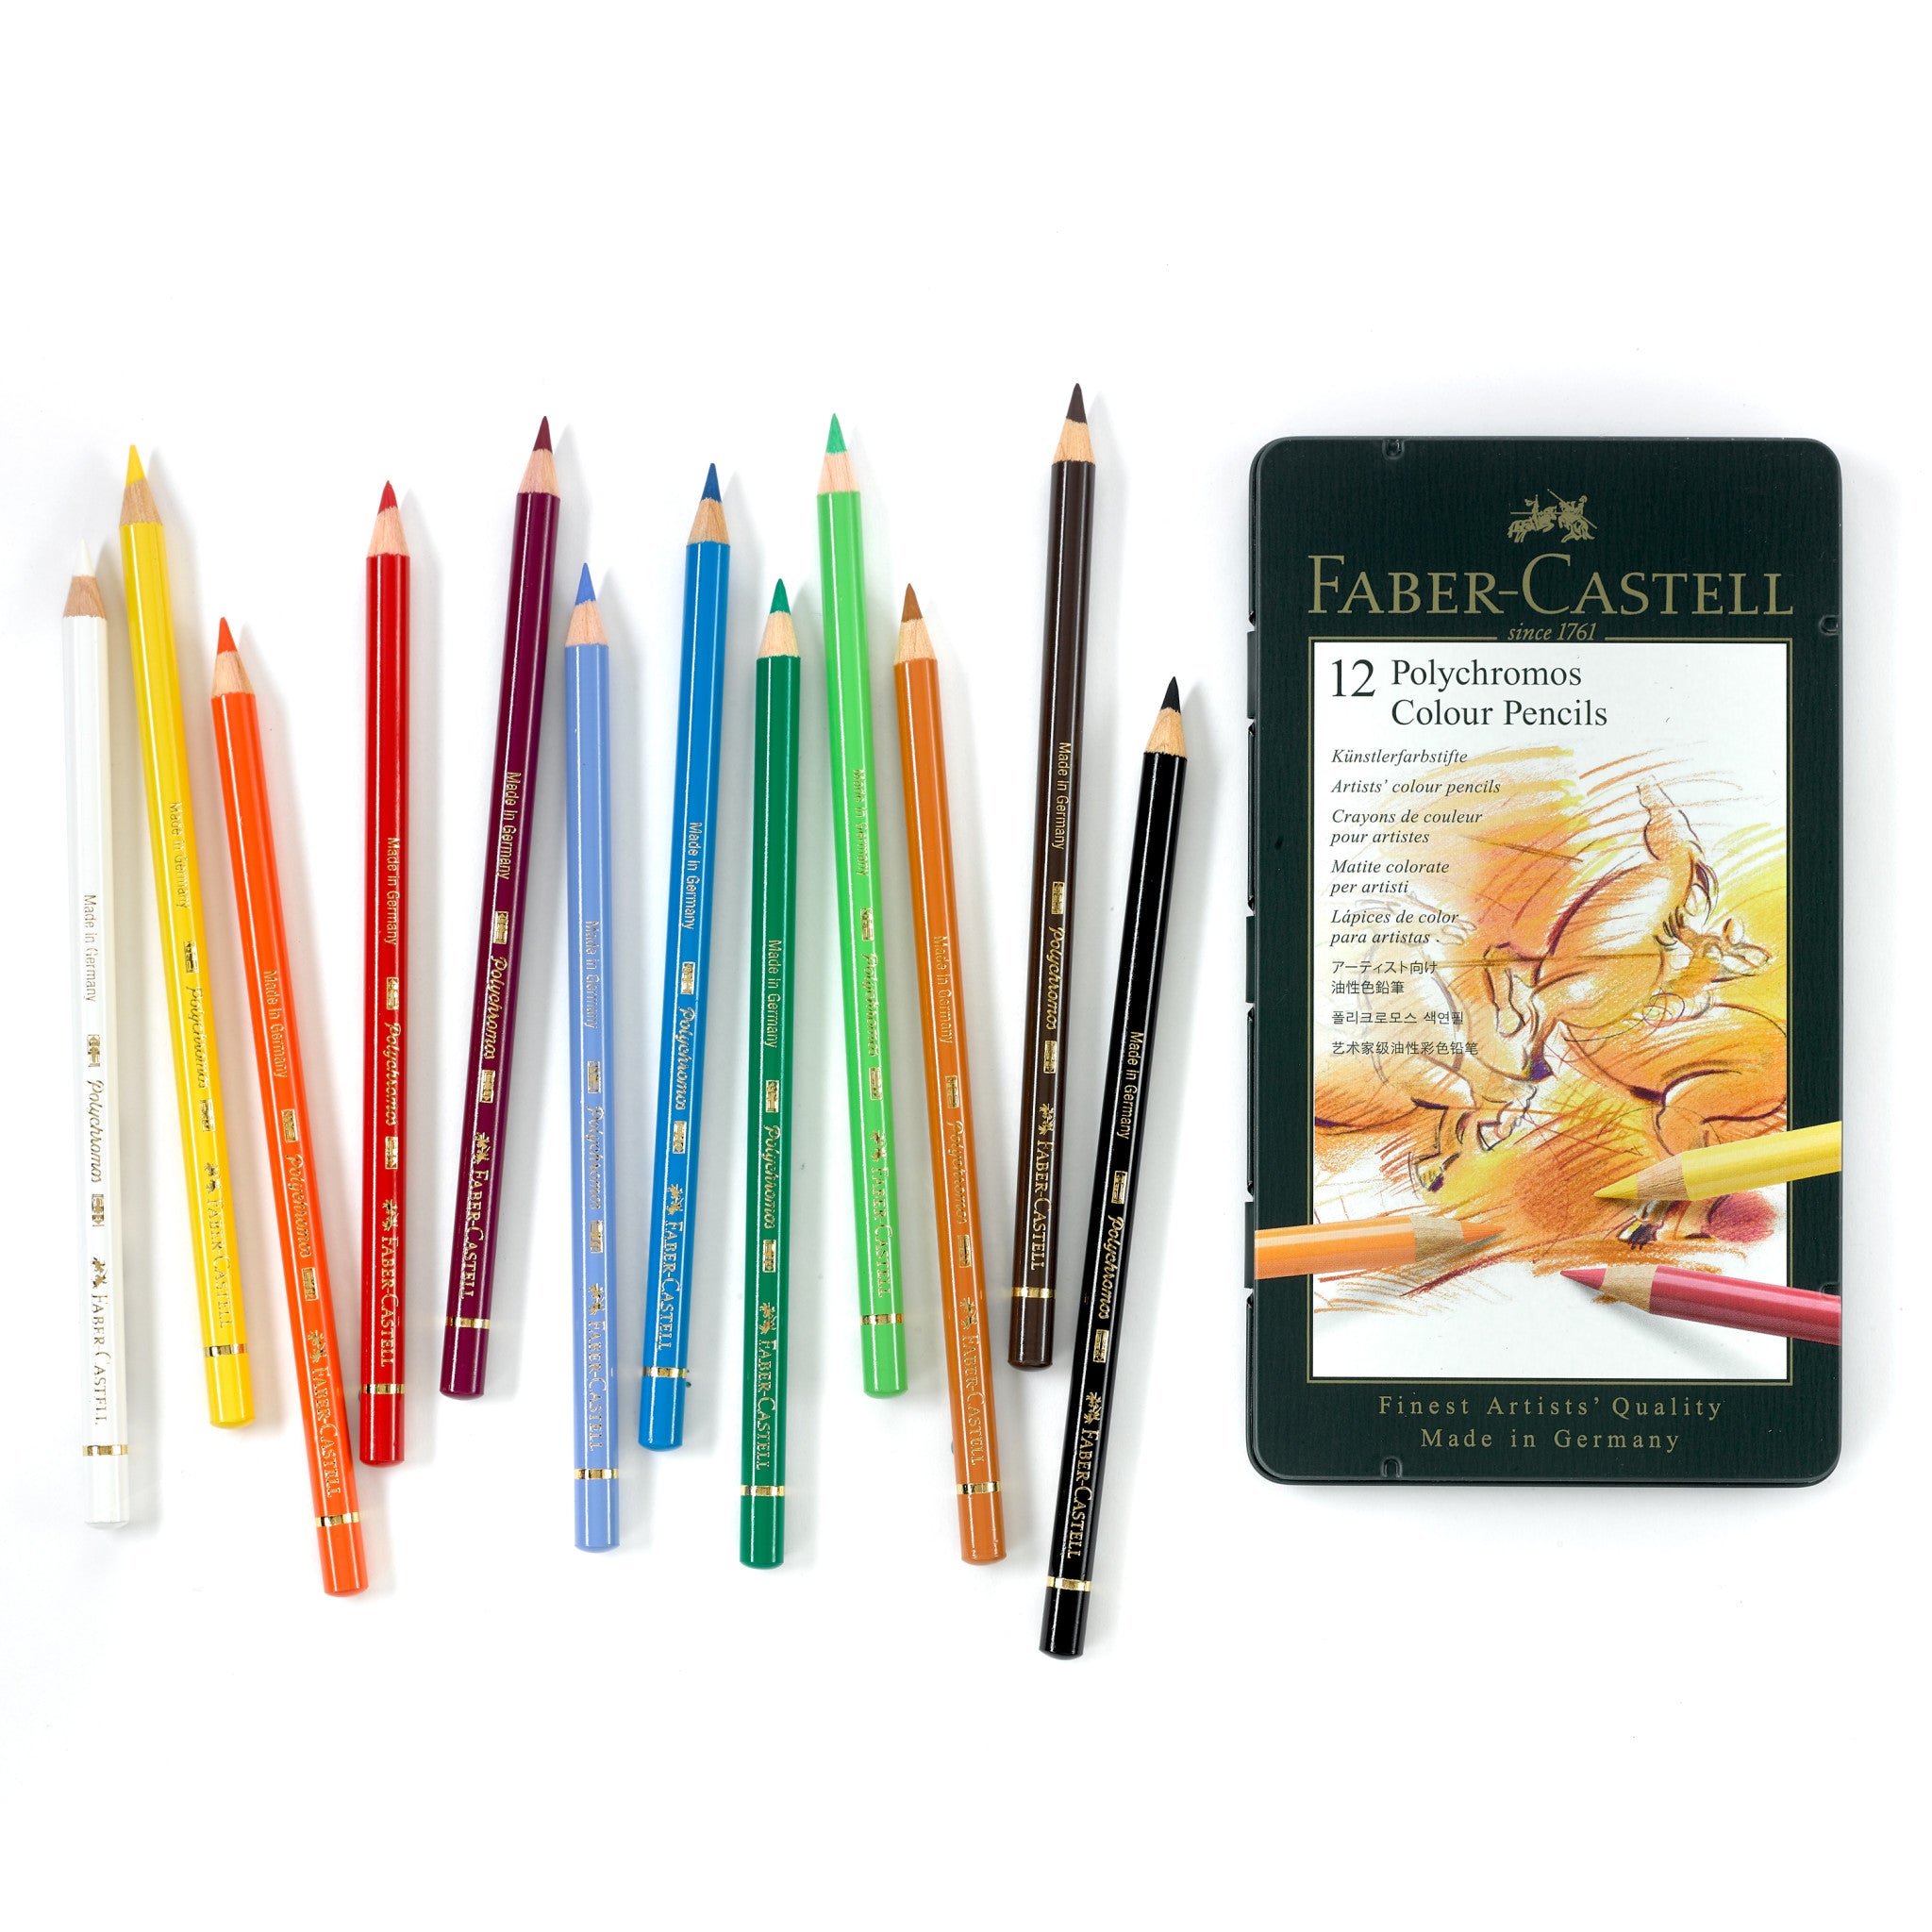 Faber-Castell 554250-50 Rotuladores - Multicolor